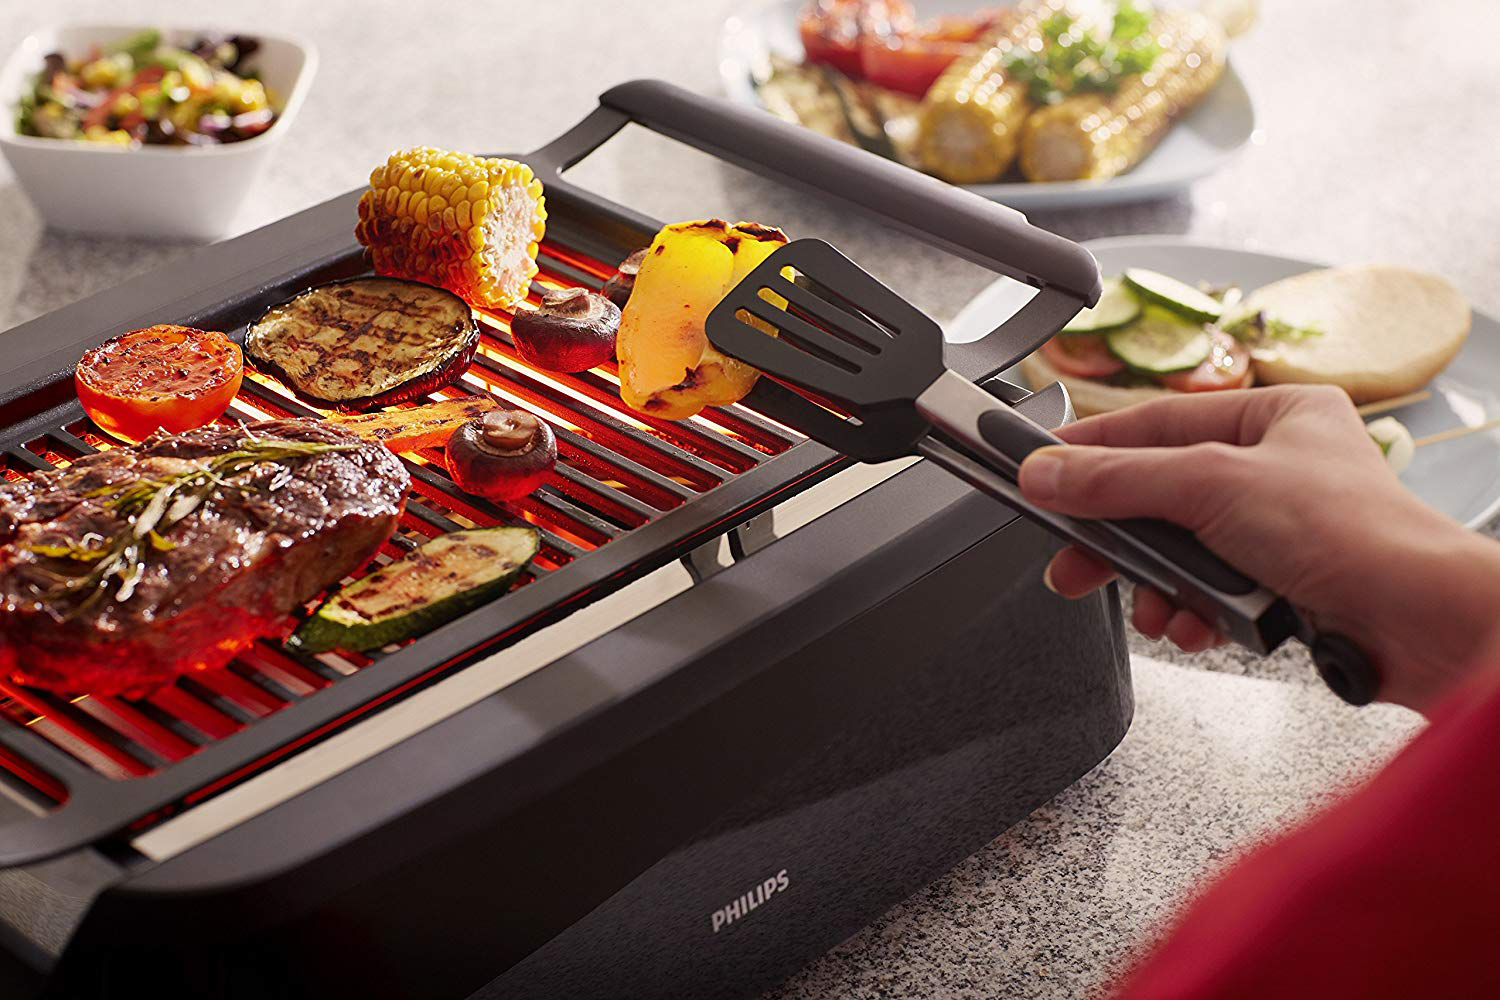 https://www.themanual.com/wp-content/uploads/sites/9/2017/10/philips-smoke-less-indoor-bbq-grill.jpg?fit=800%2C533&p=1